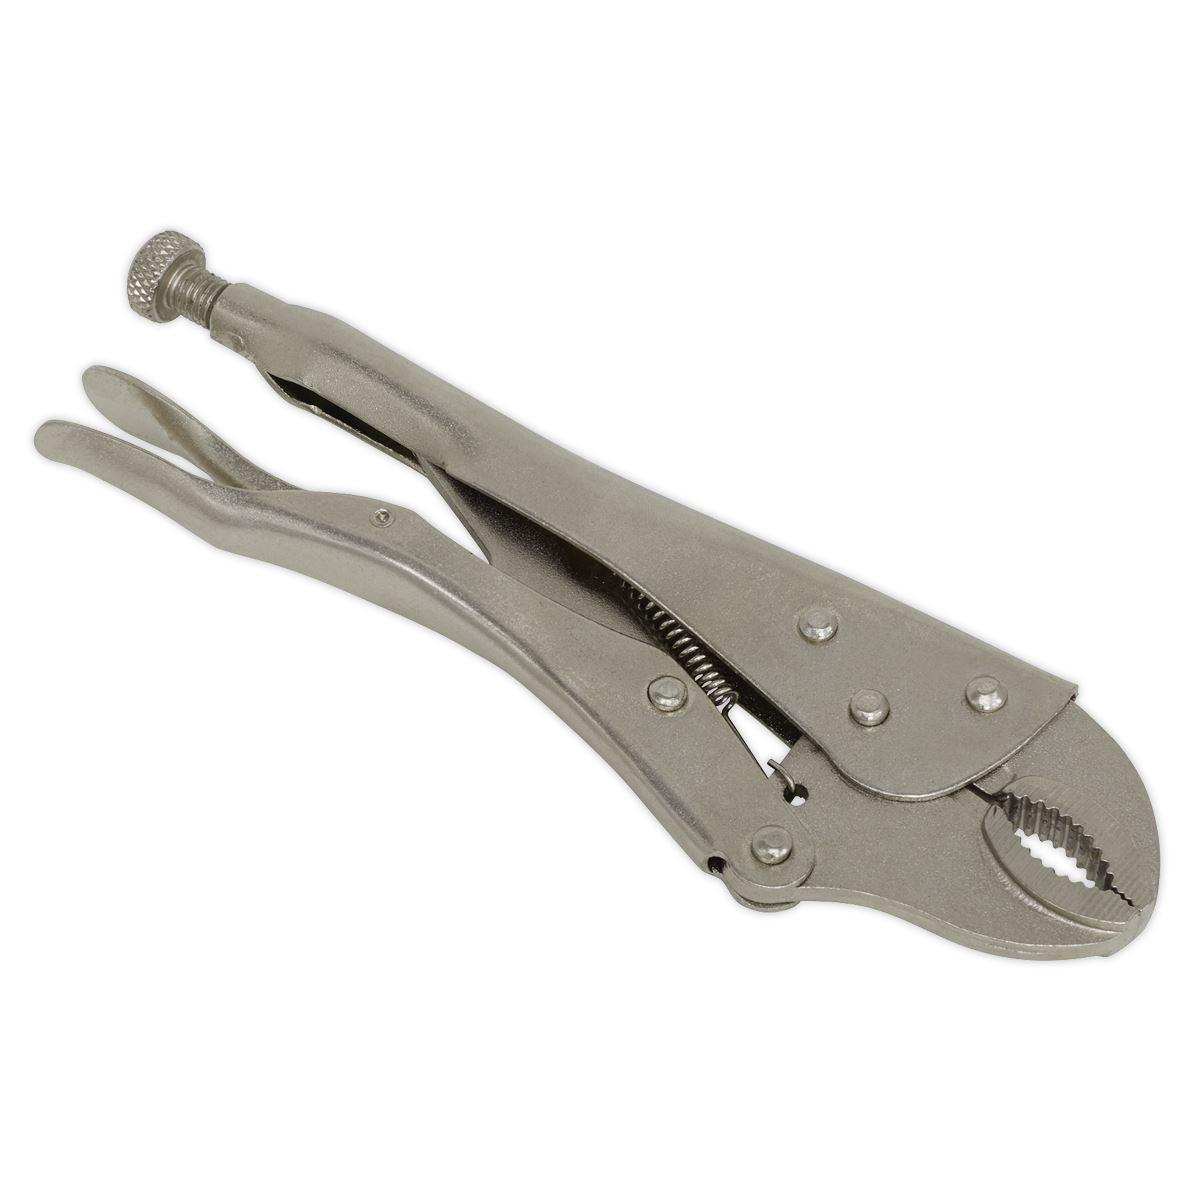 Siegen by Sealey Locking Pliers 215mm Curved Jaw